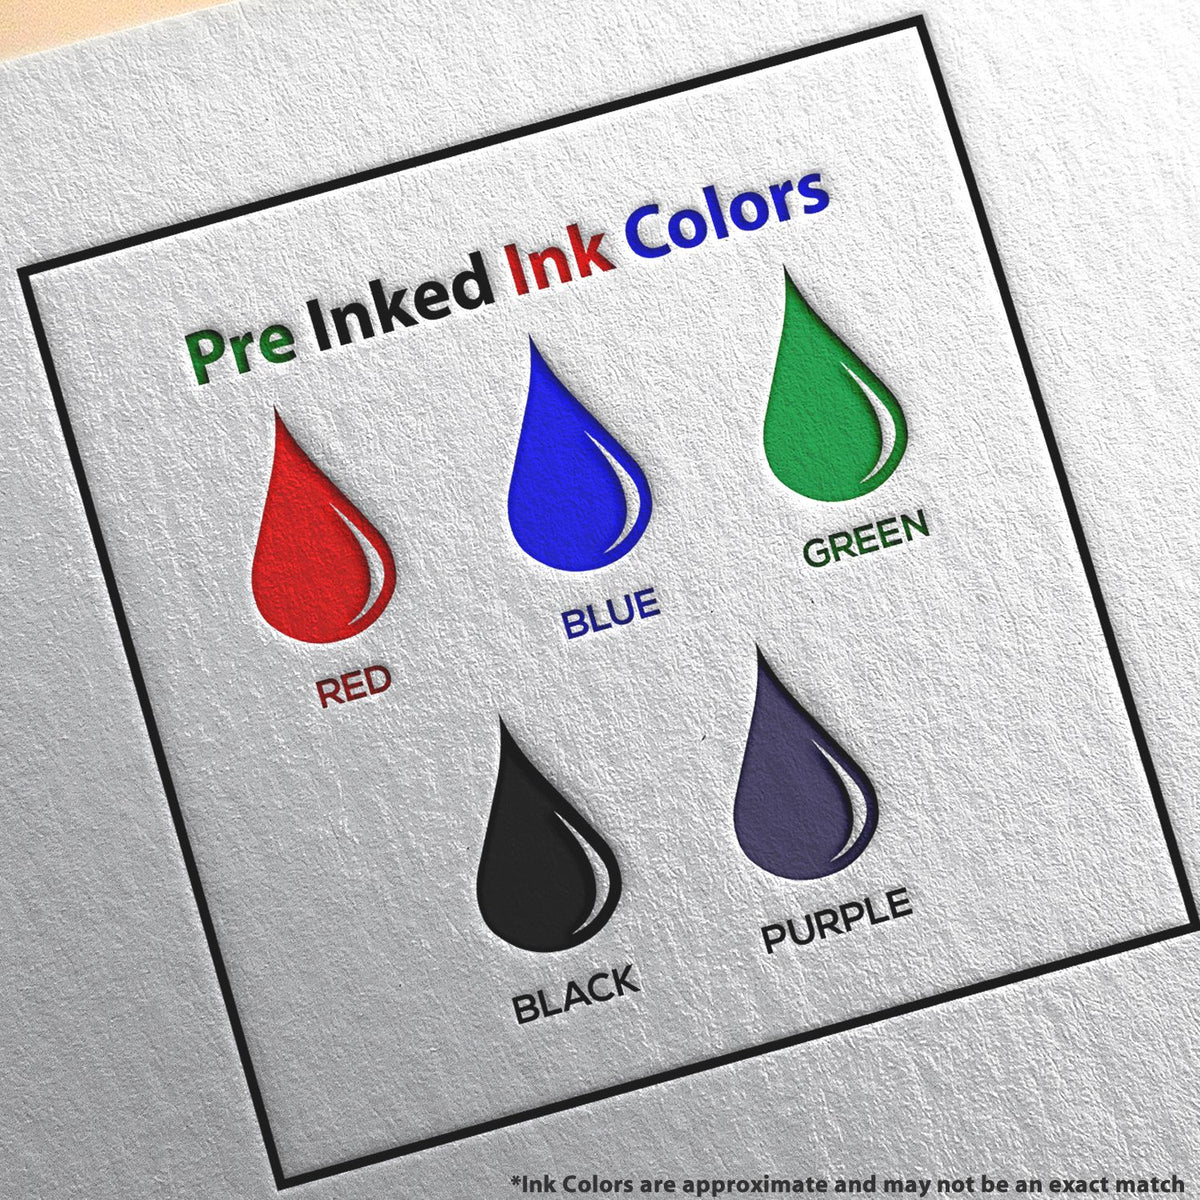 A picture showing the different ink colors or hues available for the Premium MaxLight Pre-Inked Hawaii Engineering Stamp product.